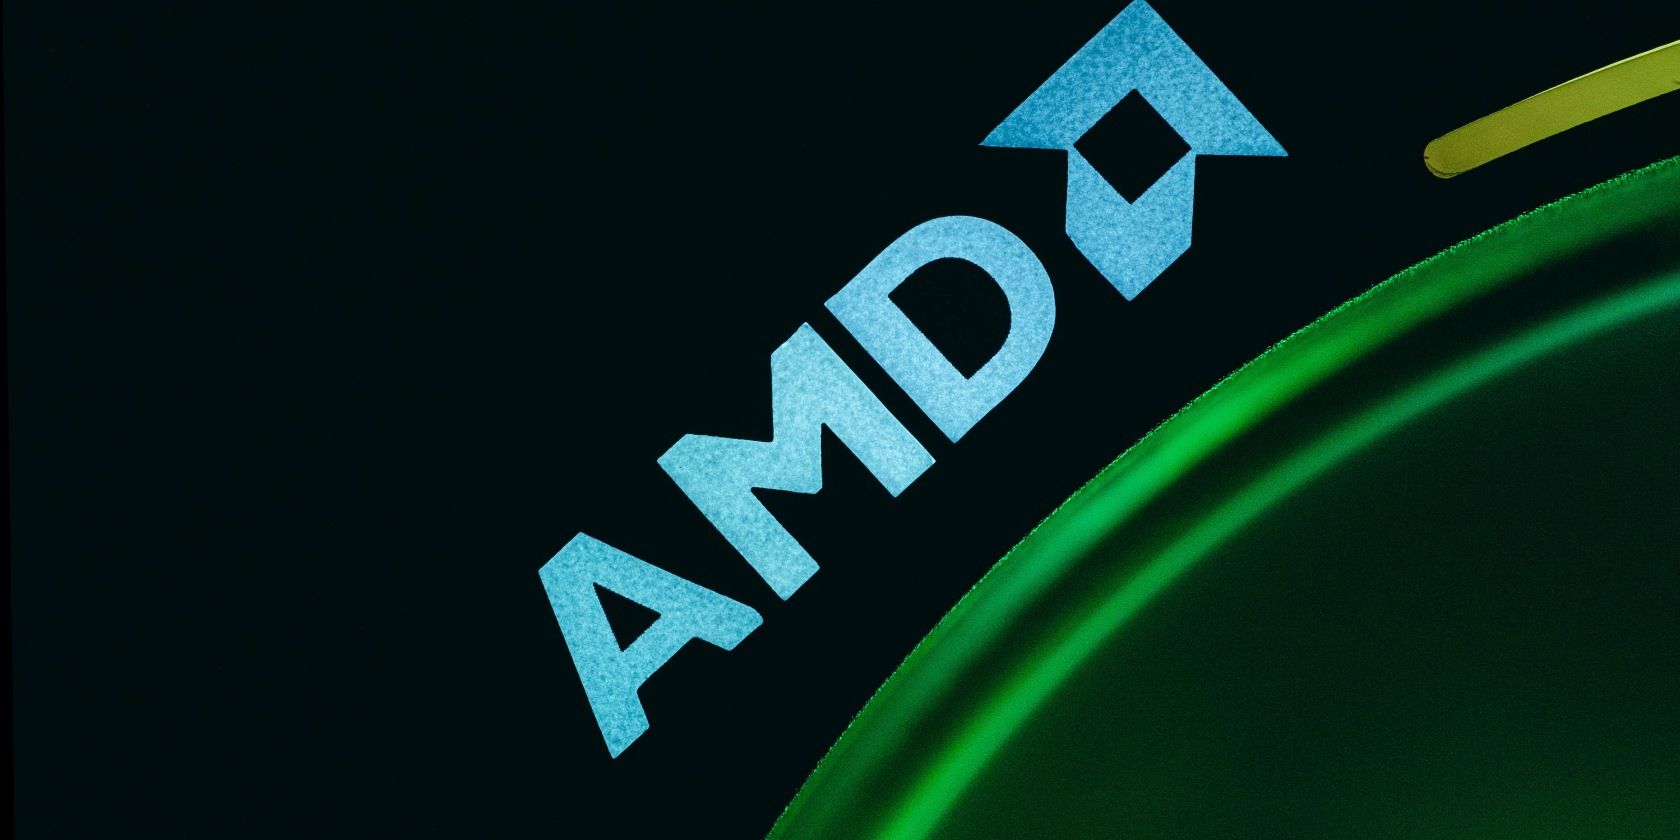 windows update may have automatically replaced amd graphics drivers